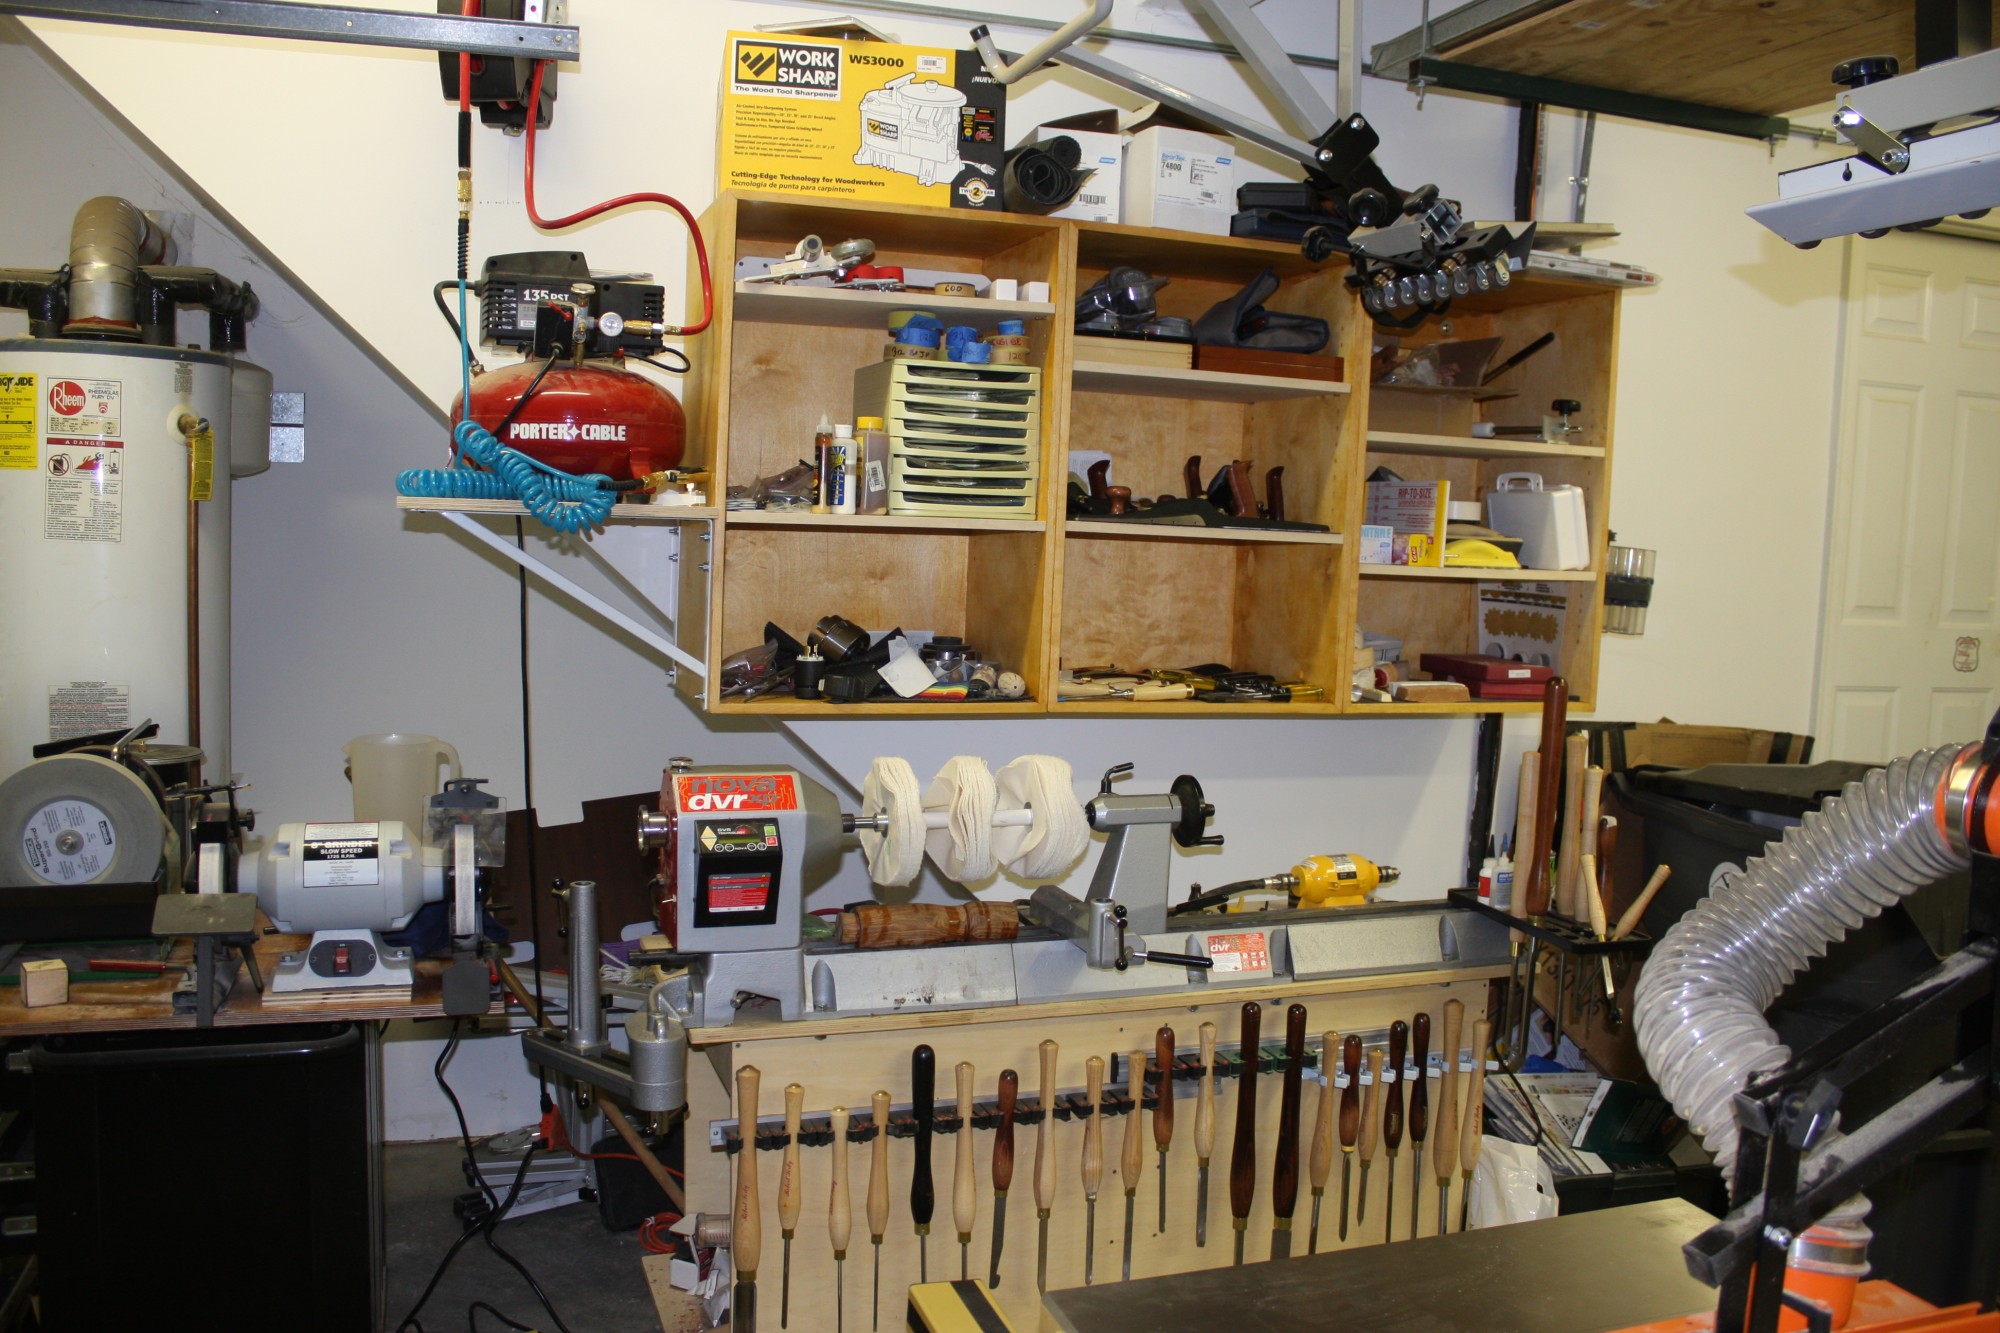 Lathe and Tools cabinet